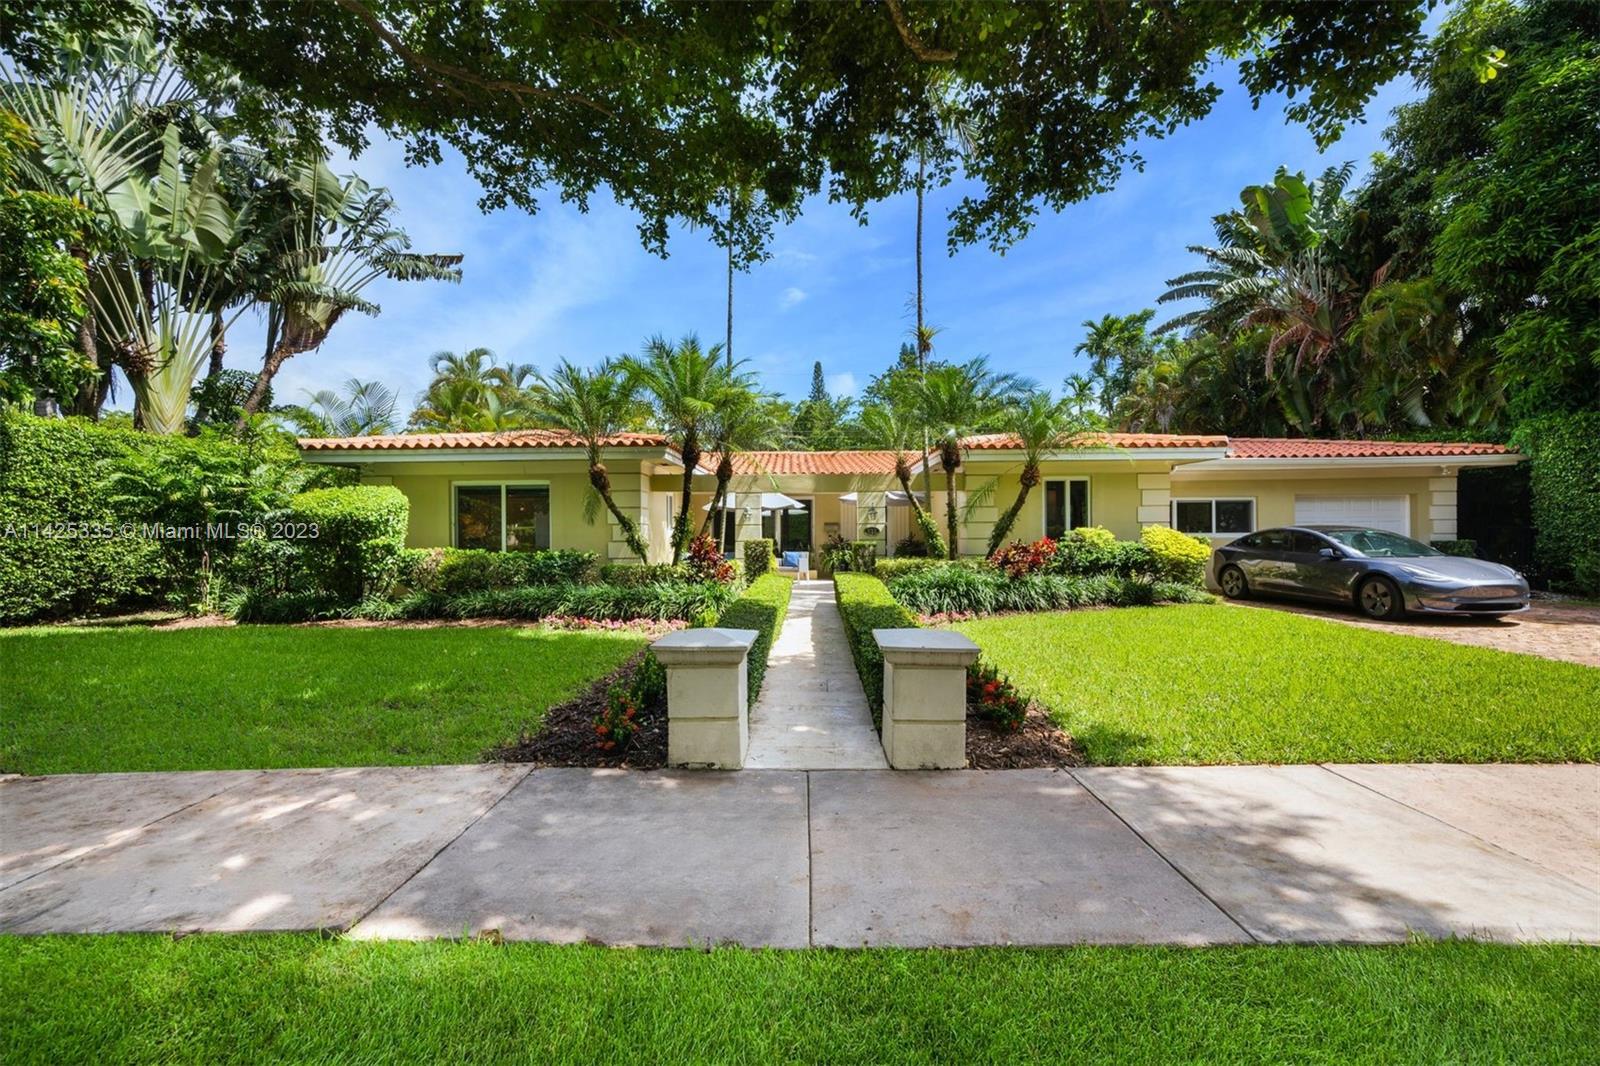 True perfection in the rarely available Coral Gables Platinum Triangle!  This 3BD 3BA stunning single story home is move-in ready with top quality designer finishes & permitted upgrades. Stylish modern open kitchen, beautifully updated baths, marble floors, large pool, private covered veranda with hot tub. Electric car charging, air-conditioned gym (garage conversion can easily revert back to 1-car gar) full impact windows & doors. Incredible location in the desirable Sunset Elementary school district, near Old Cutler Road, Coconut Grove & downtown South Miami. The entire property is surrounded by an impeccably trimmed 17 ft privacy hedge, creating a tropical oasis in the backyard. Owners have meticulously taken care of this home down to the last detail. This listing will not last long!